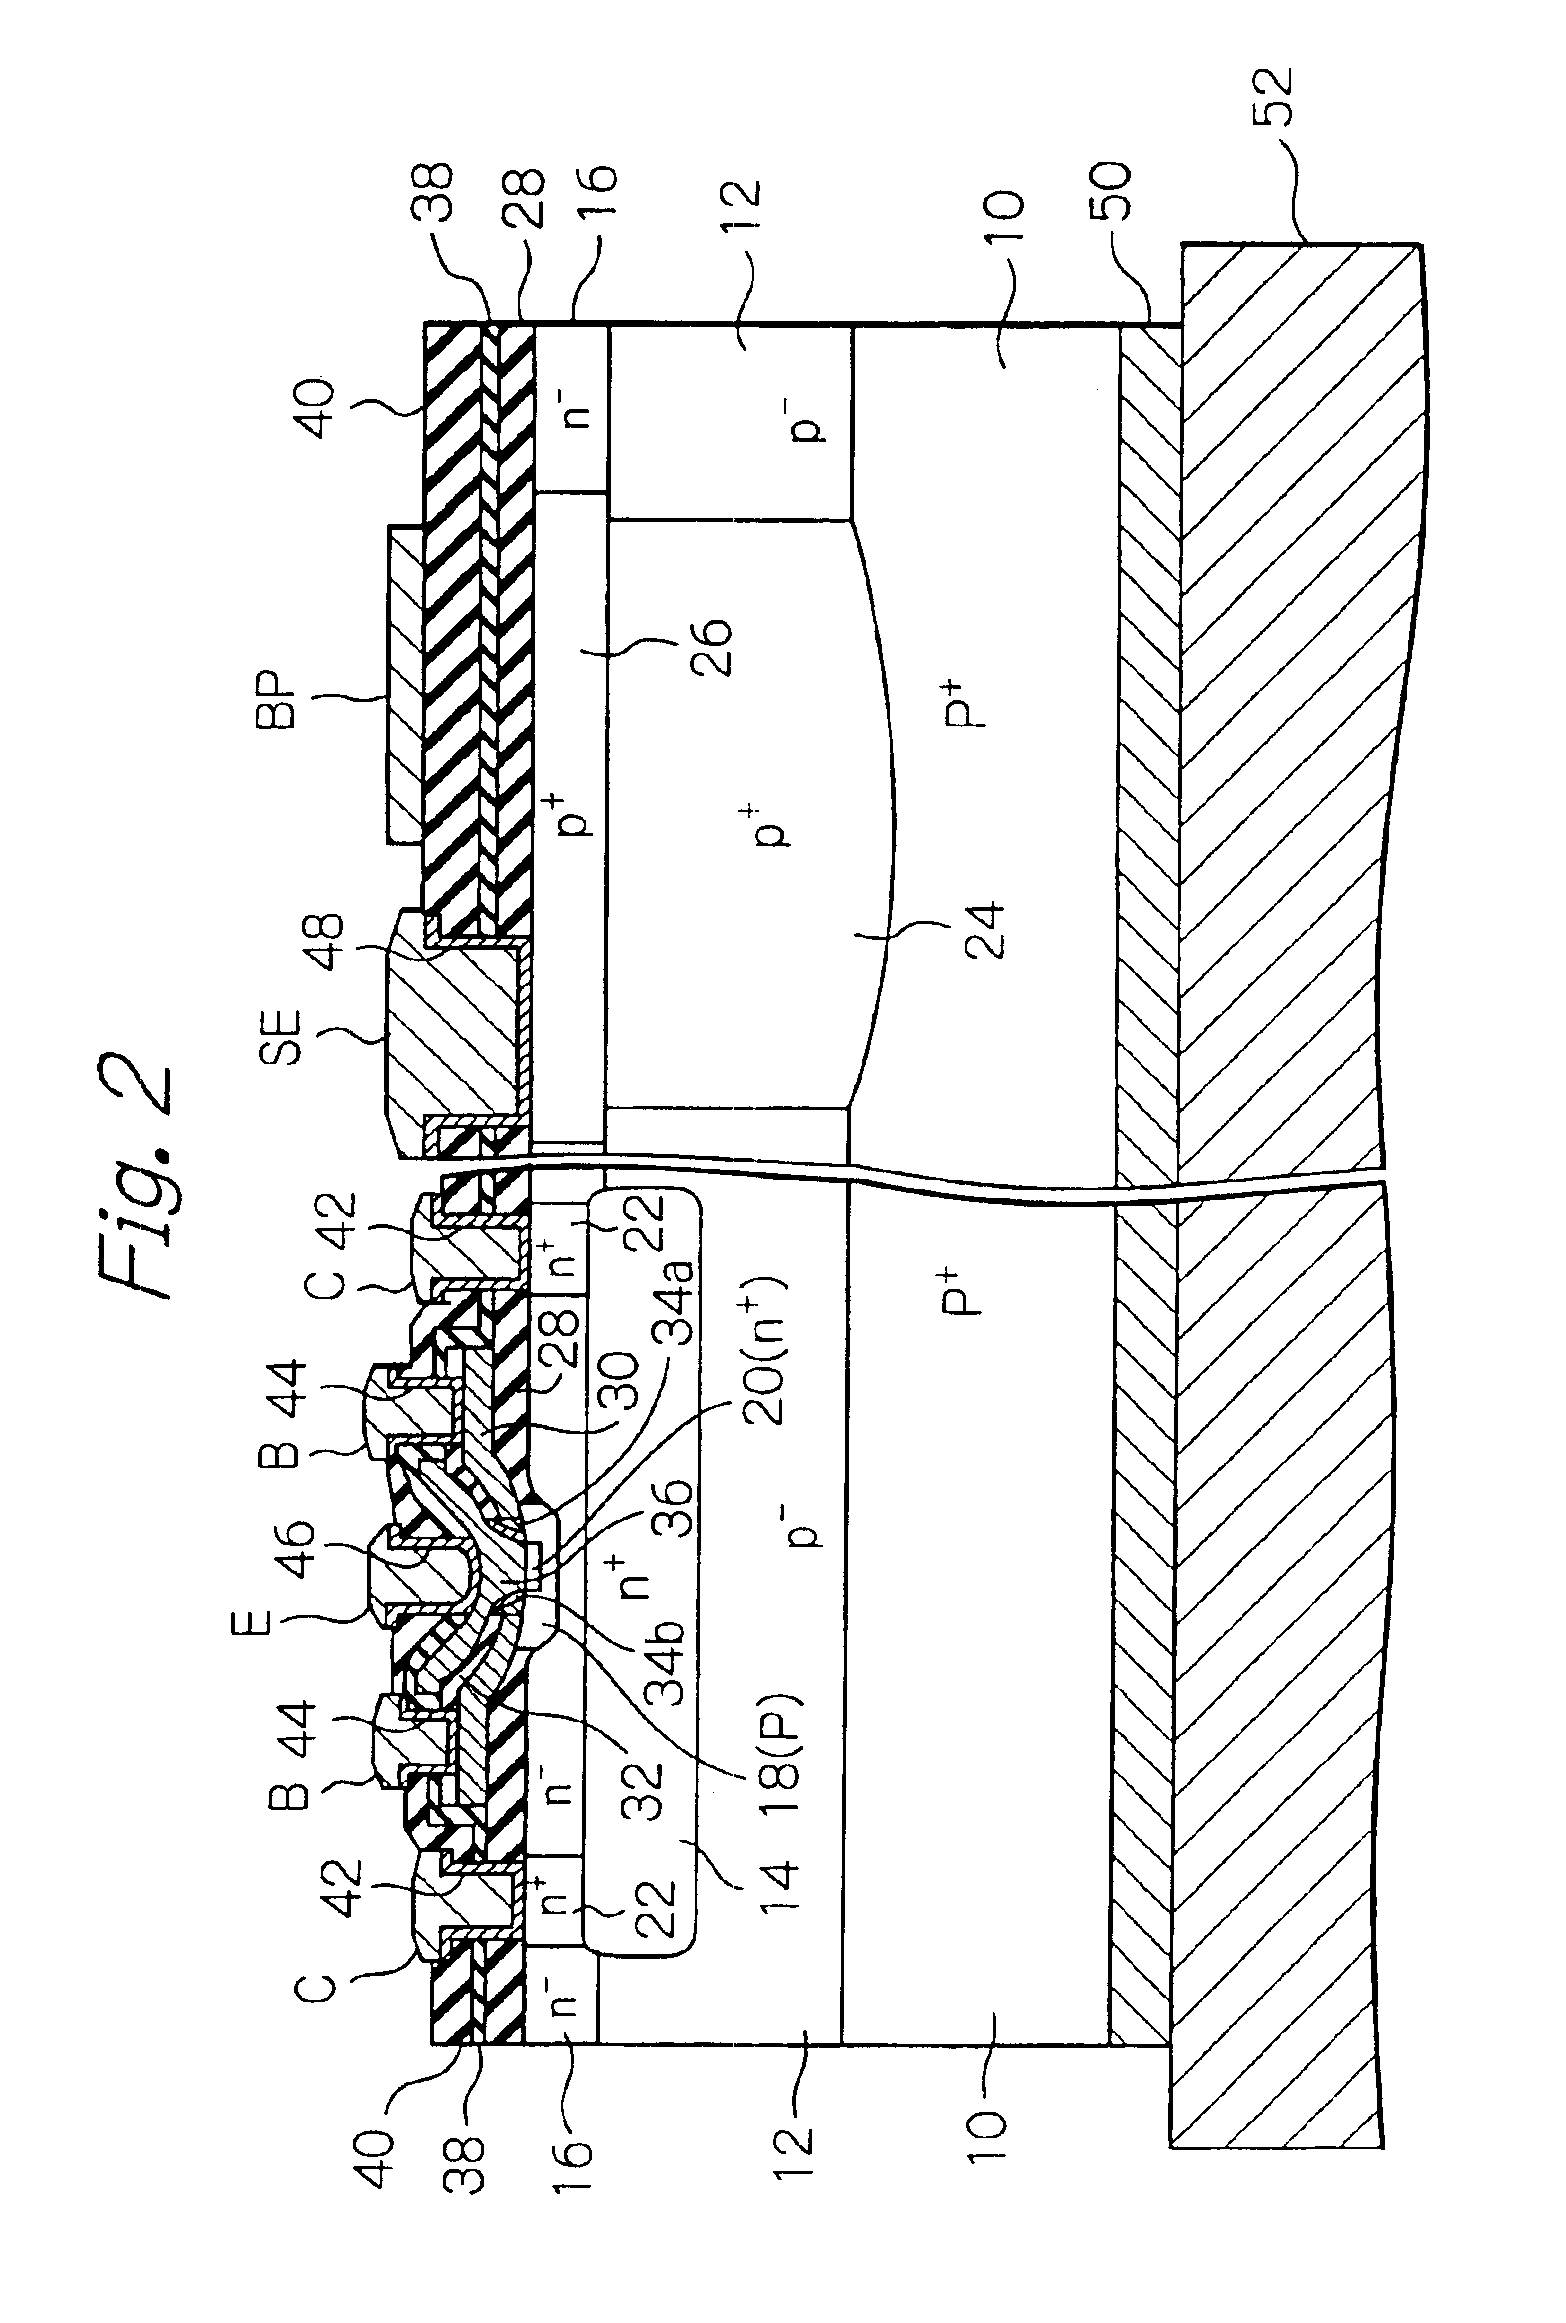 Semiconductor device including bipolar junction transistor, and production method therefor